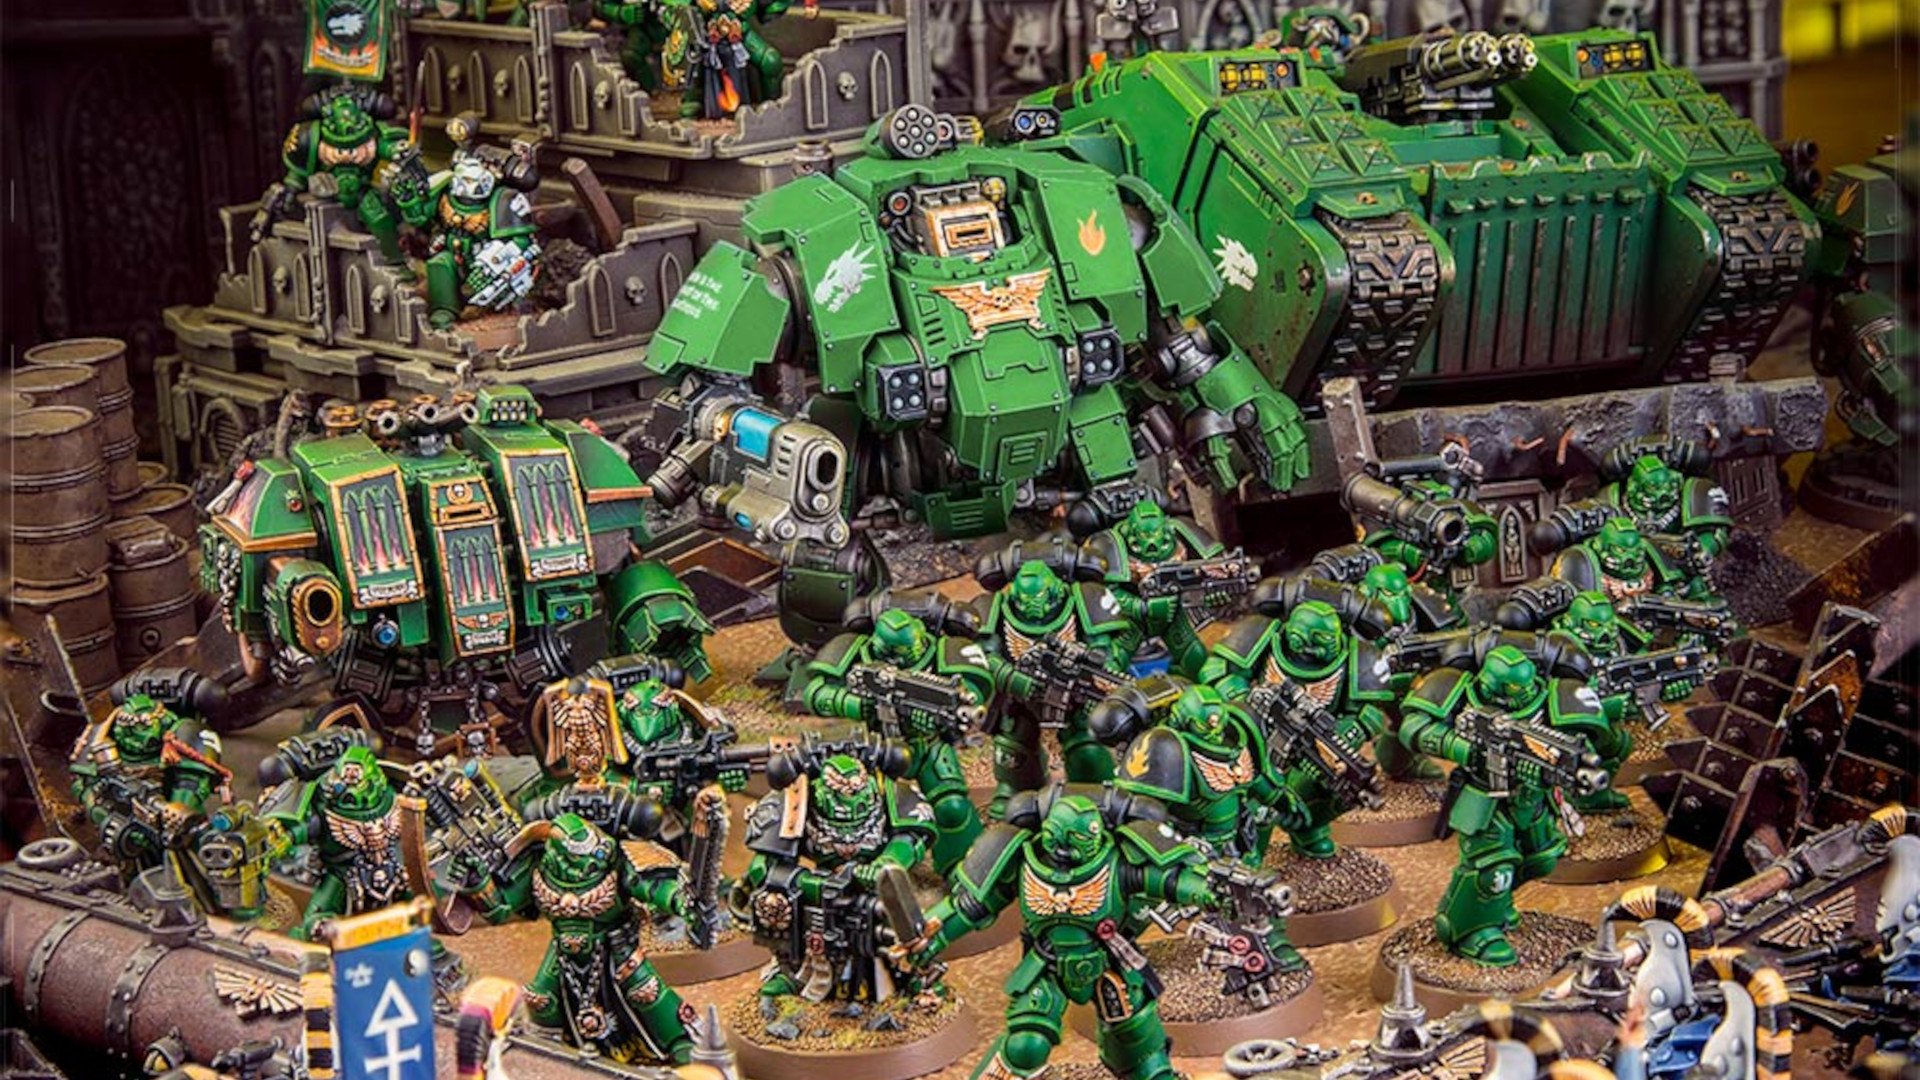 Warhammer 40k Salamanders army - diorama photograph by Games Workshop, a massed force of green armoured Salamanders Space Marines, dreadnought walkers and tanks